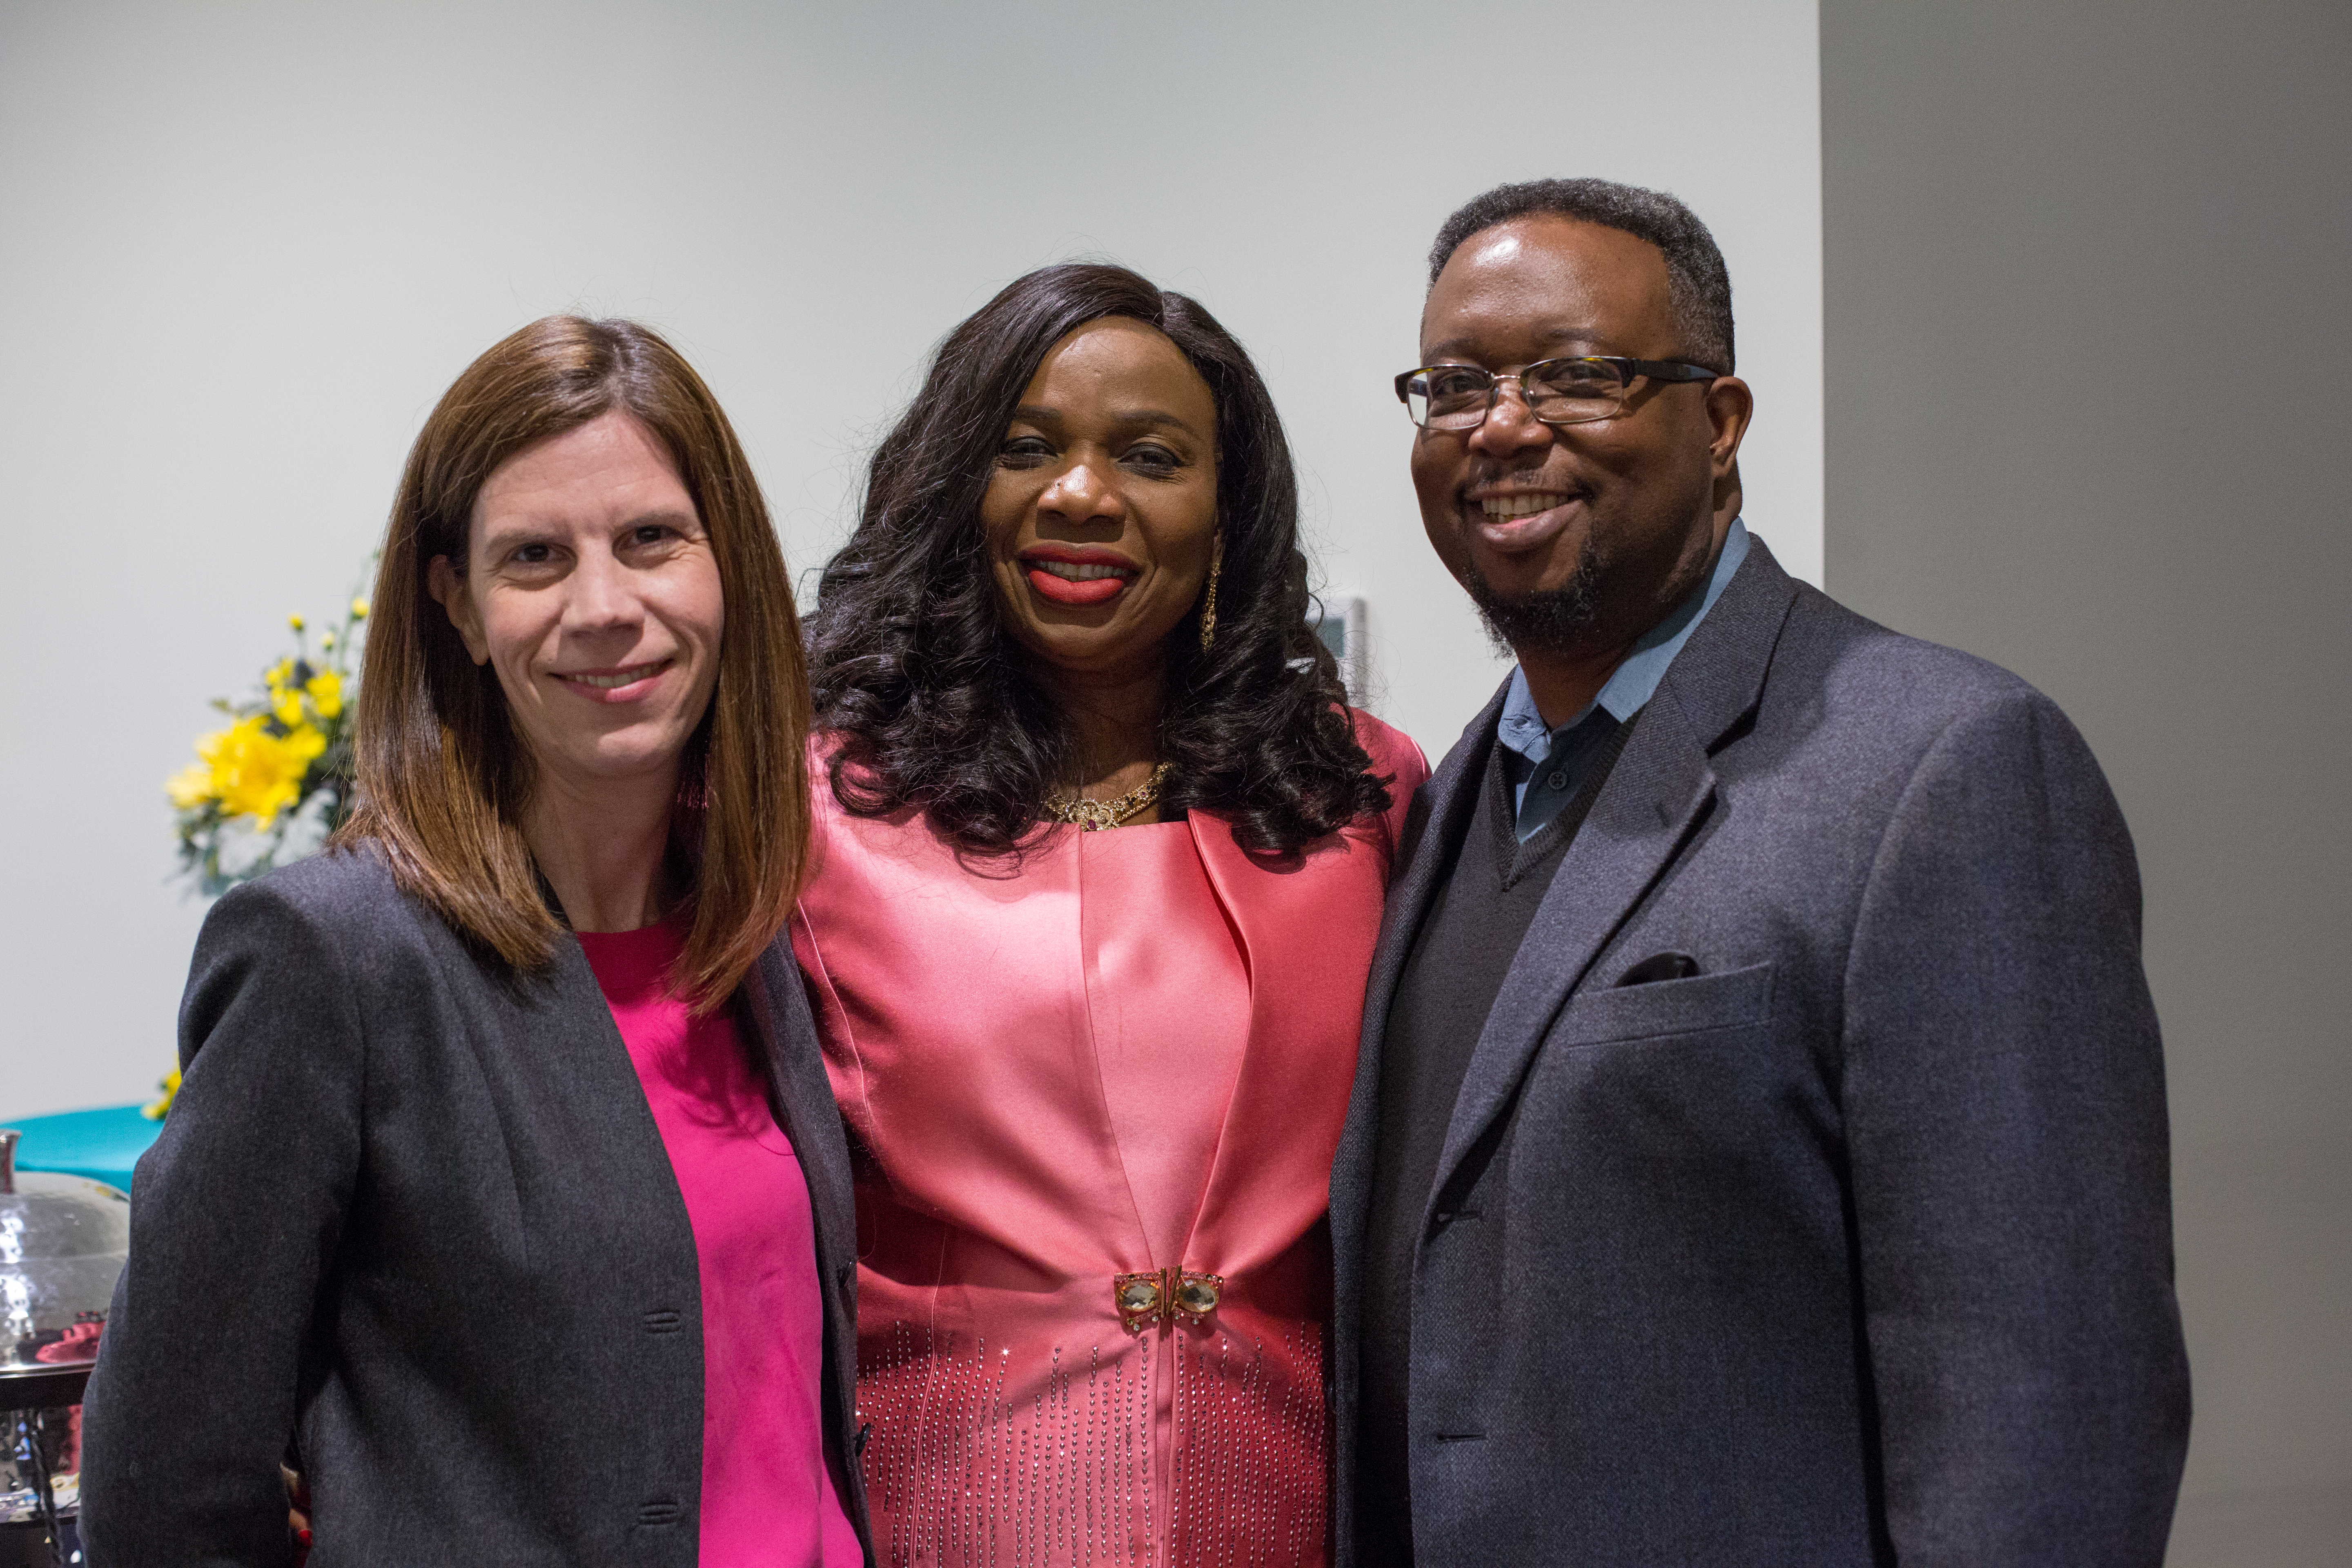 Catherine Uju Ifejika poses with Melissa Reid, associate director of NAD Public Affairs and Religious Liberty (left) and Orlan Johnson, director NAD Public Affairs and Religious Liberty (right)